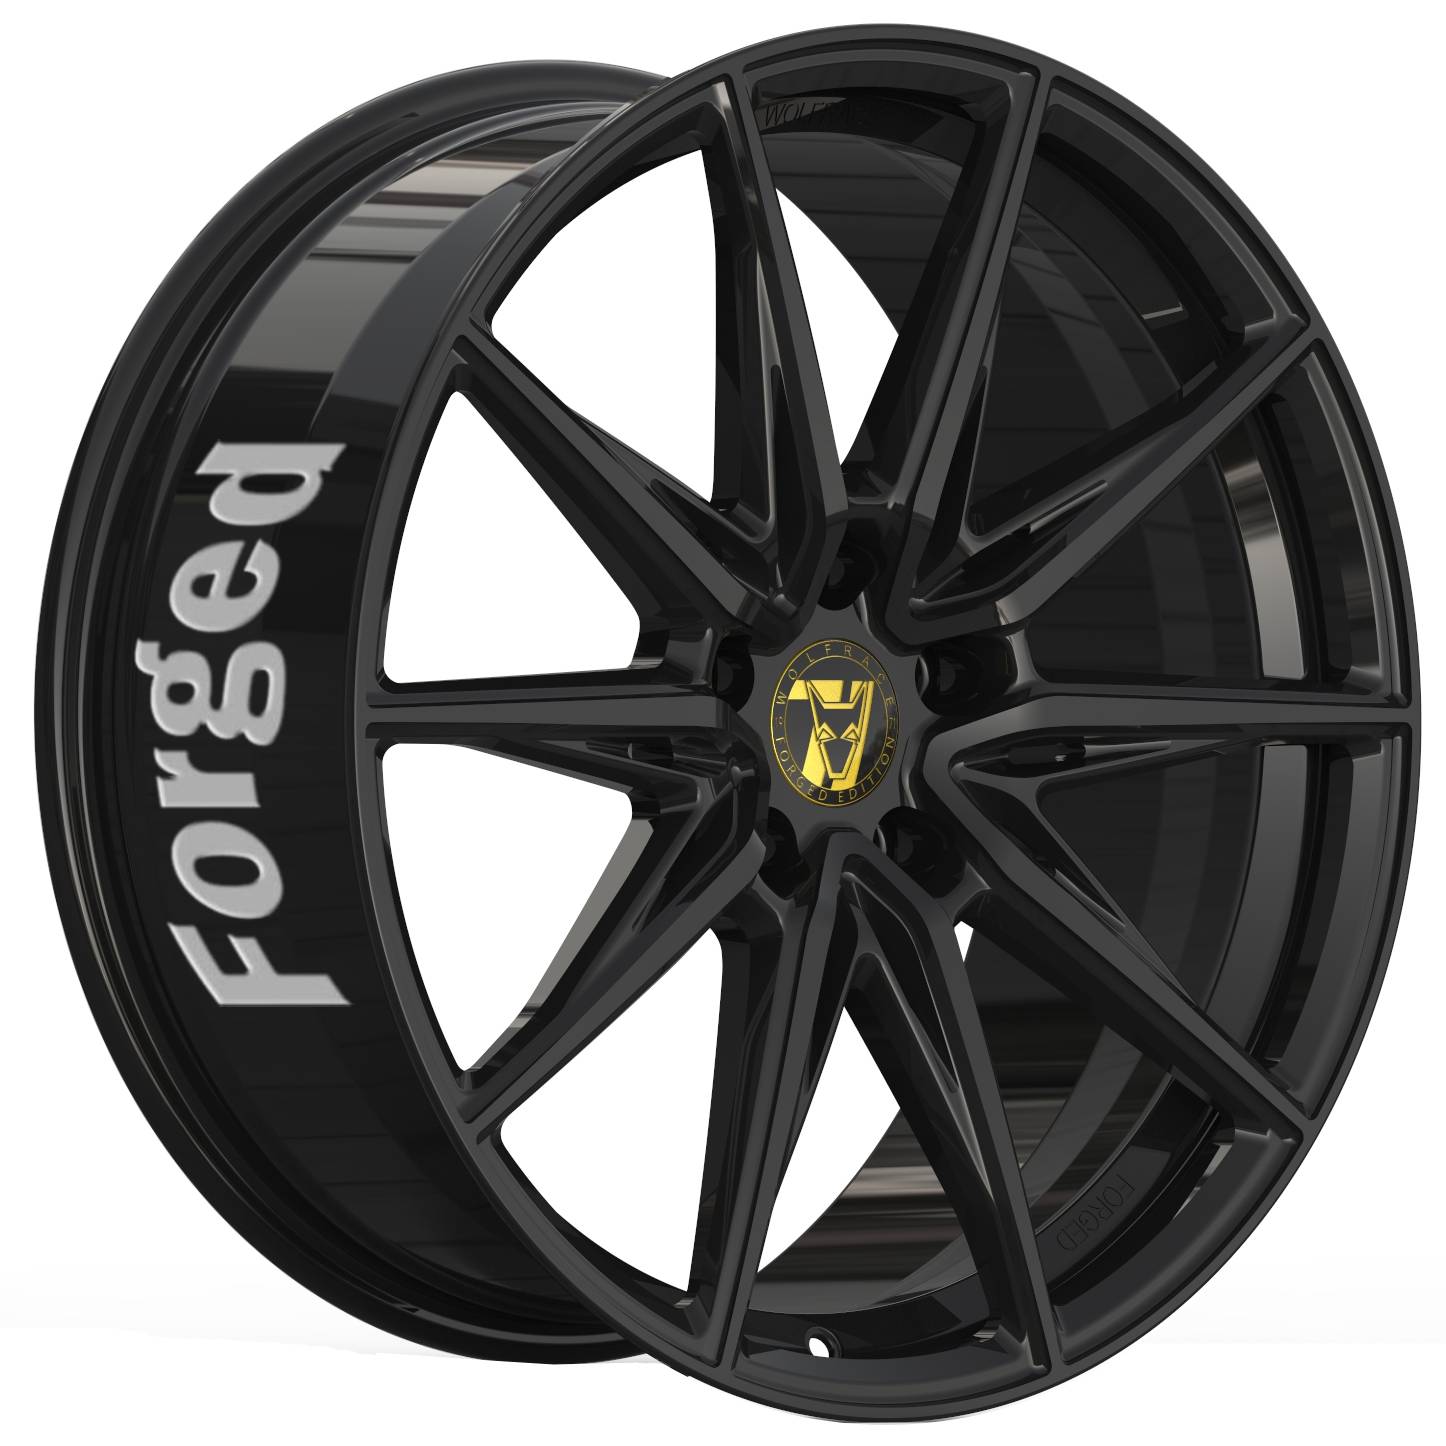 Demon Wheels 71 Forged Edition Urban Racer Forged [13x24] -5x114.3- ET 40